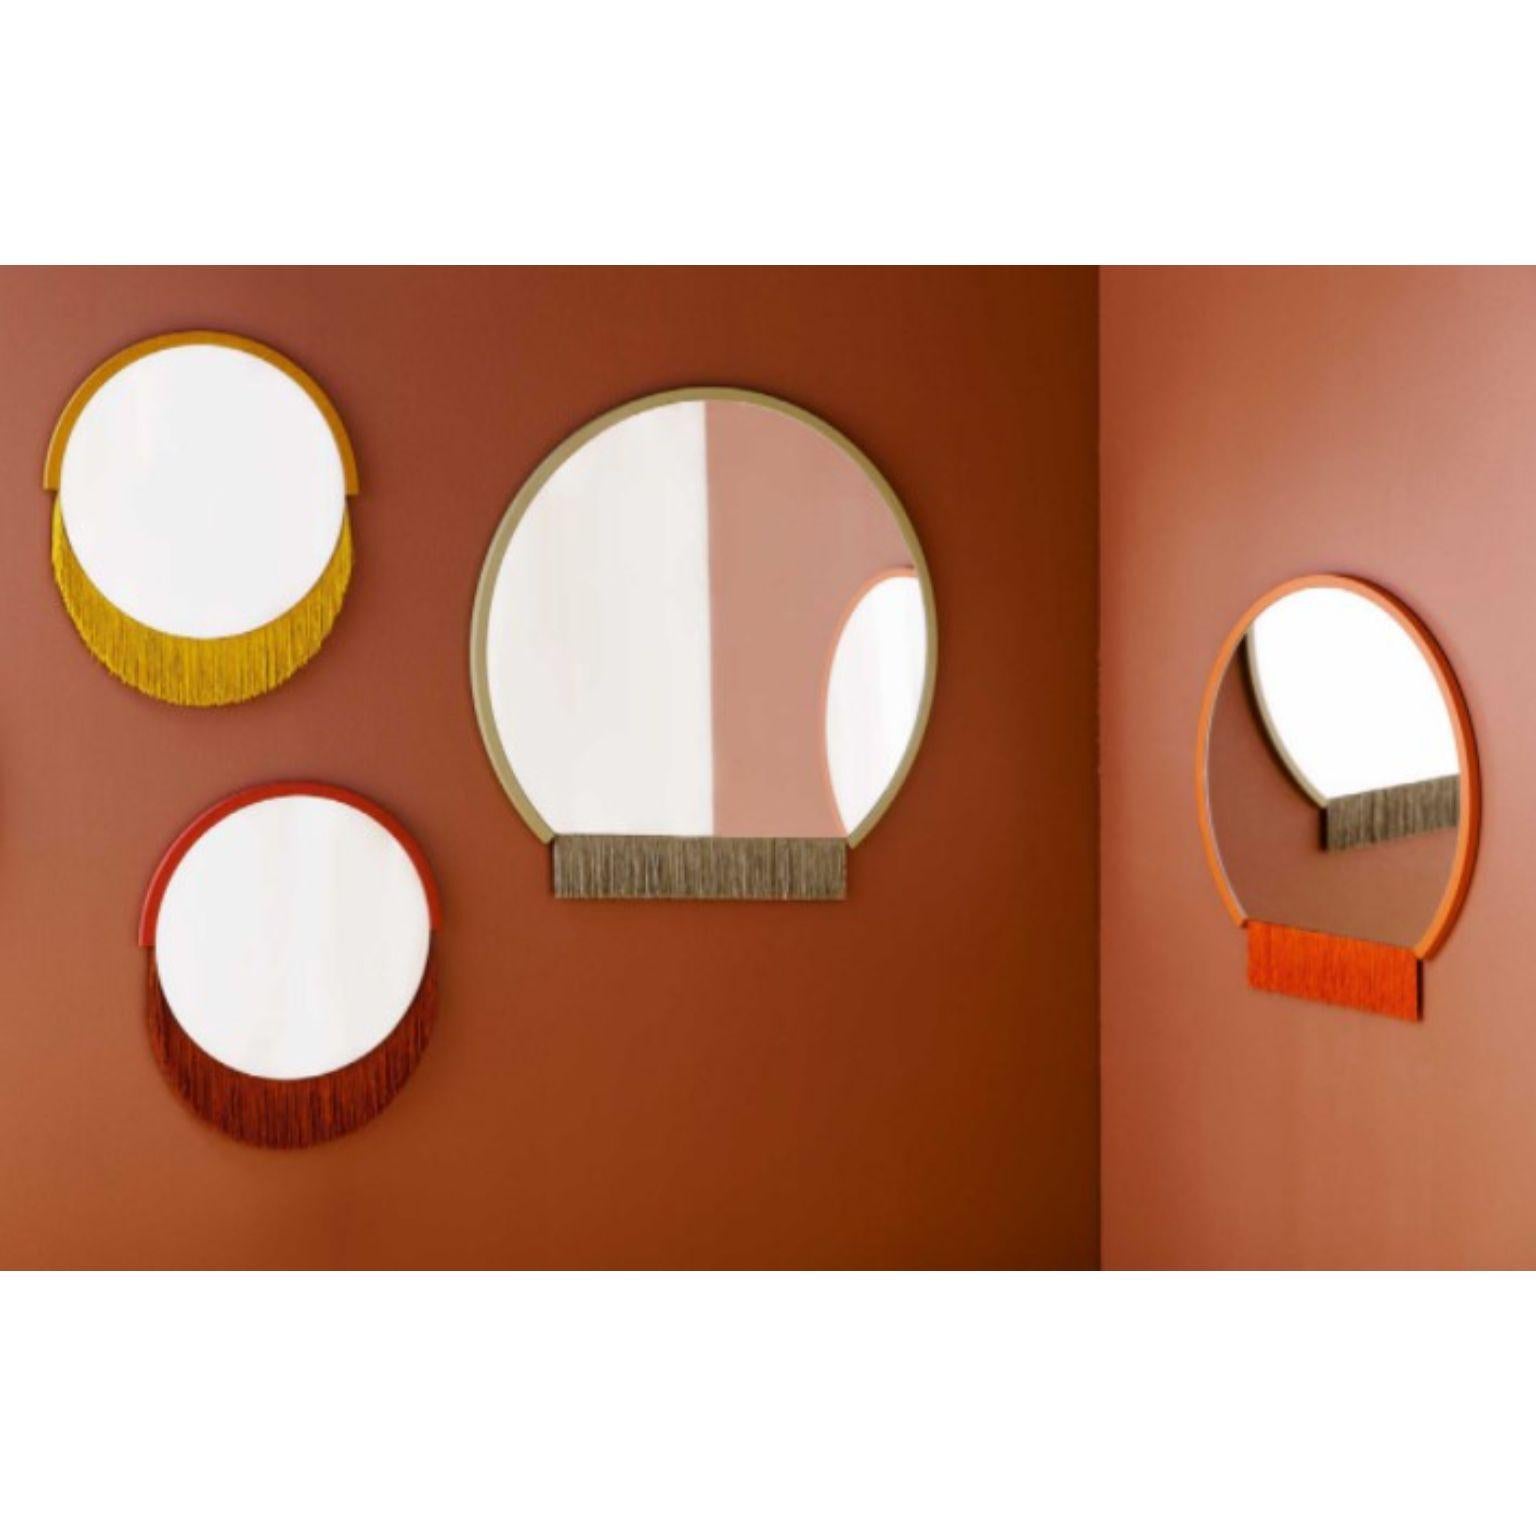 Boudoir Medium Wall Mirror by Tero Kuitunen In New Condition For Sale In Geneve, CH